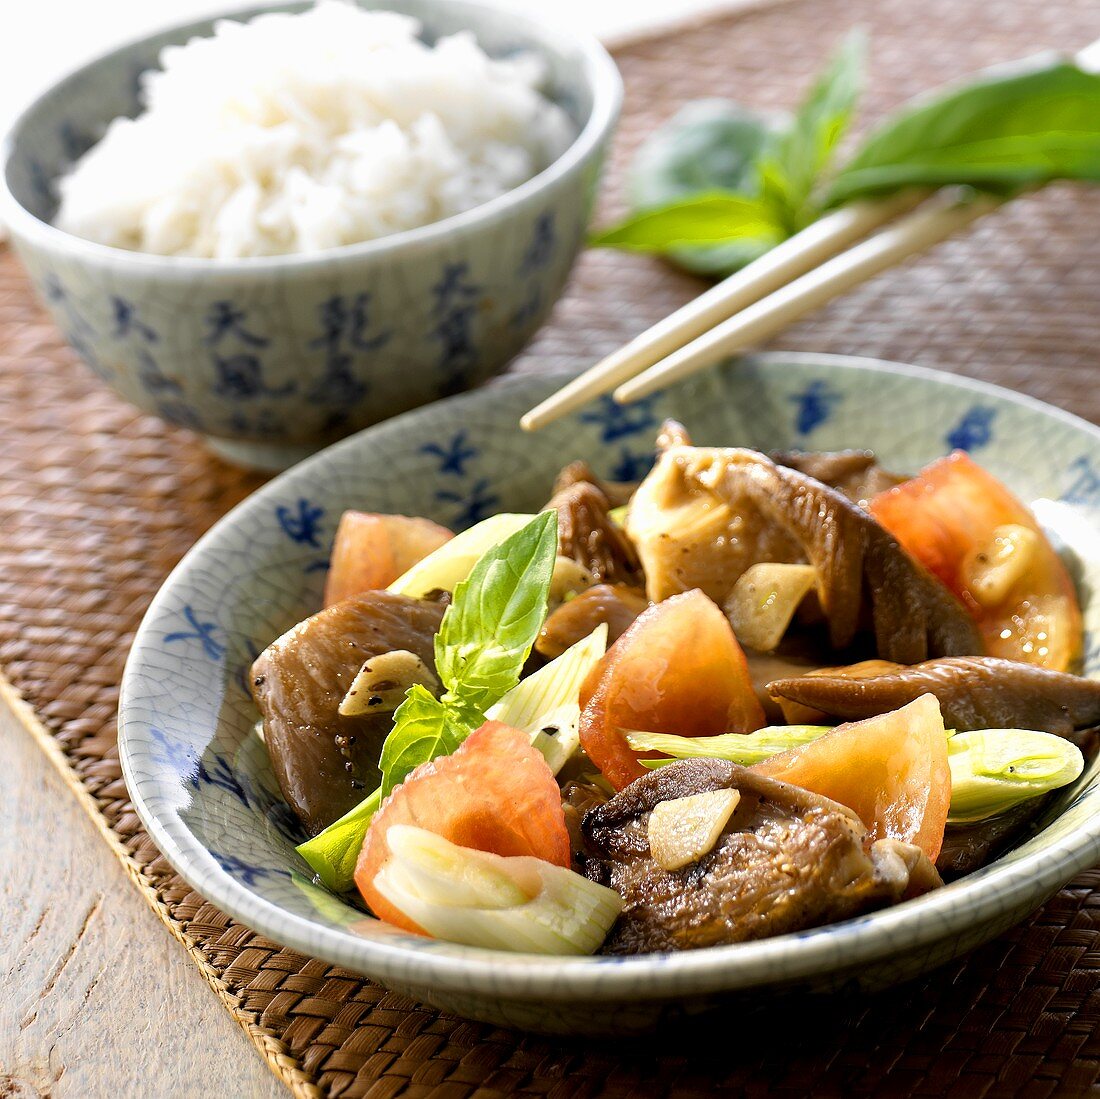 Pan-cooked vegetables with oyster mushrooms & a bowl of rice